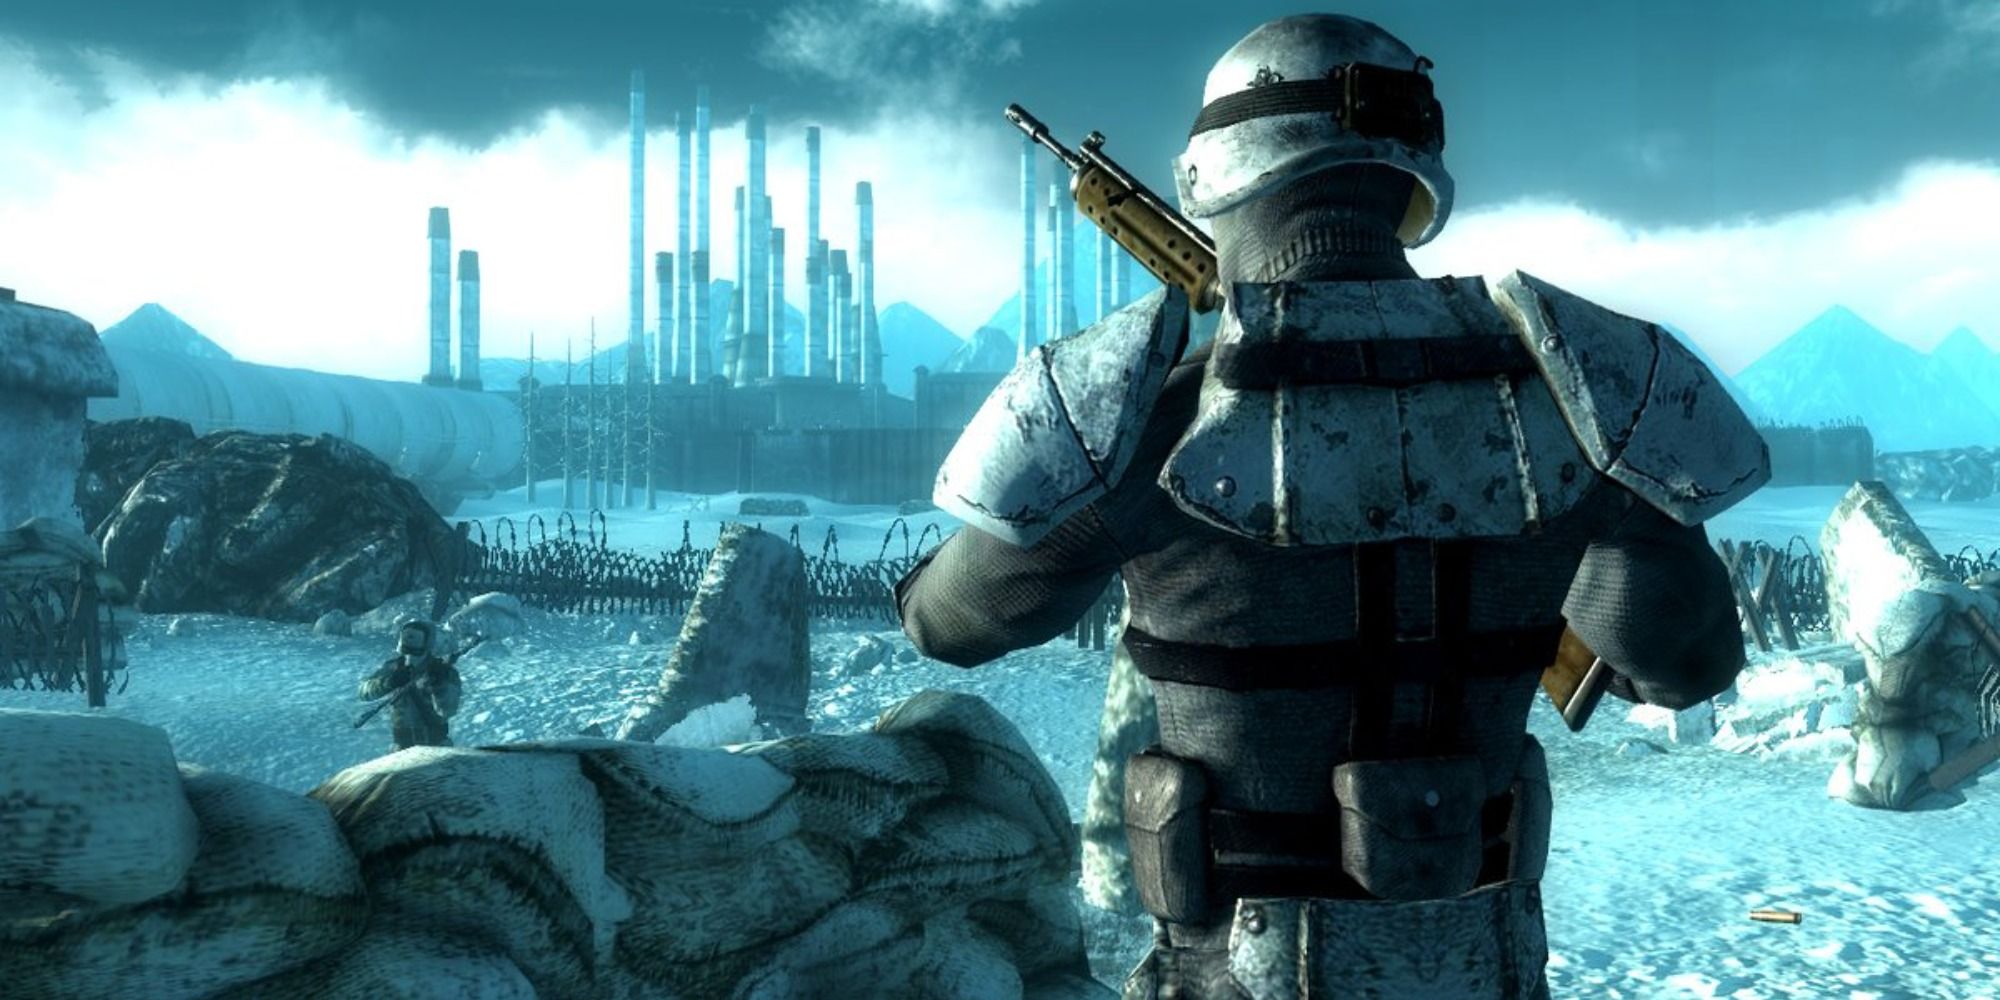 screenshot of Operation Achorage DLC from Fallout 3 with thrid person view of player character in combat armor